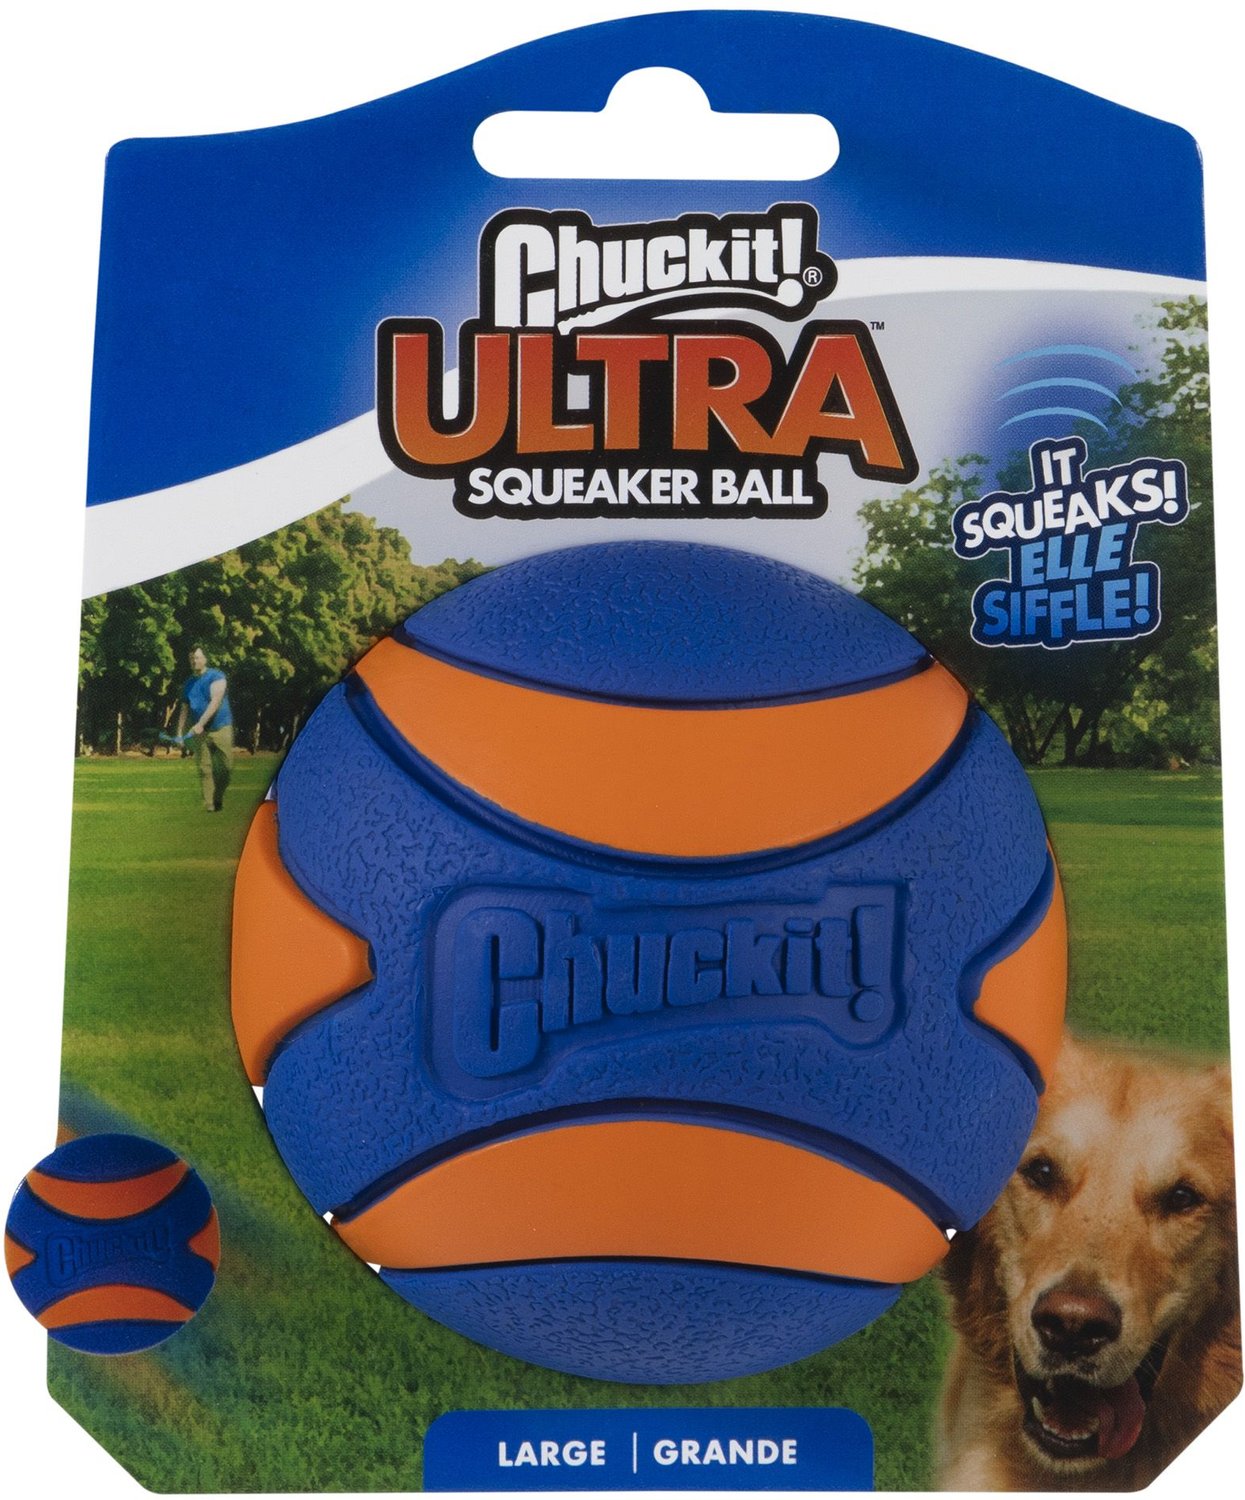 Image result for Chuckit! Ultra Squeaker Ball, Large